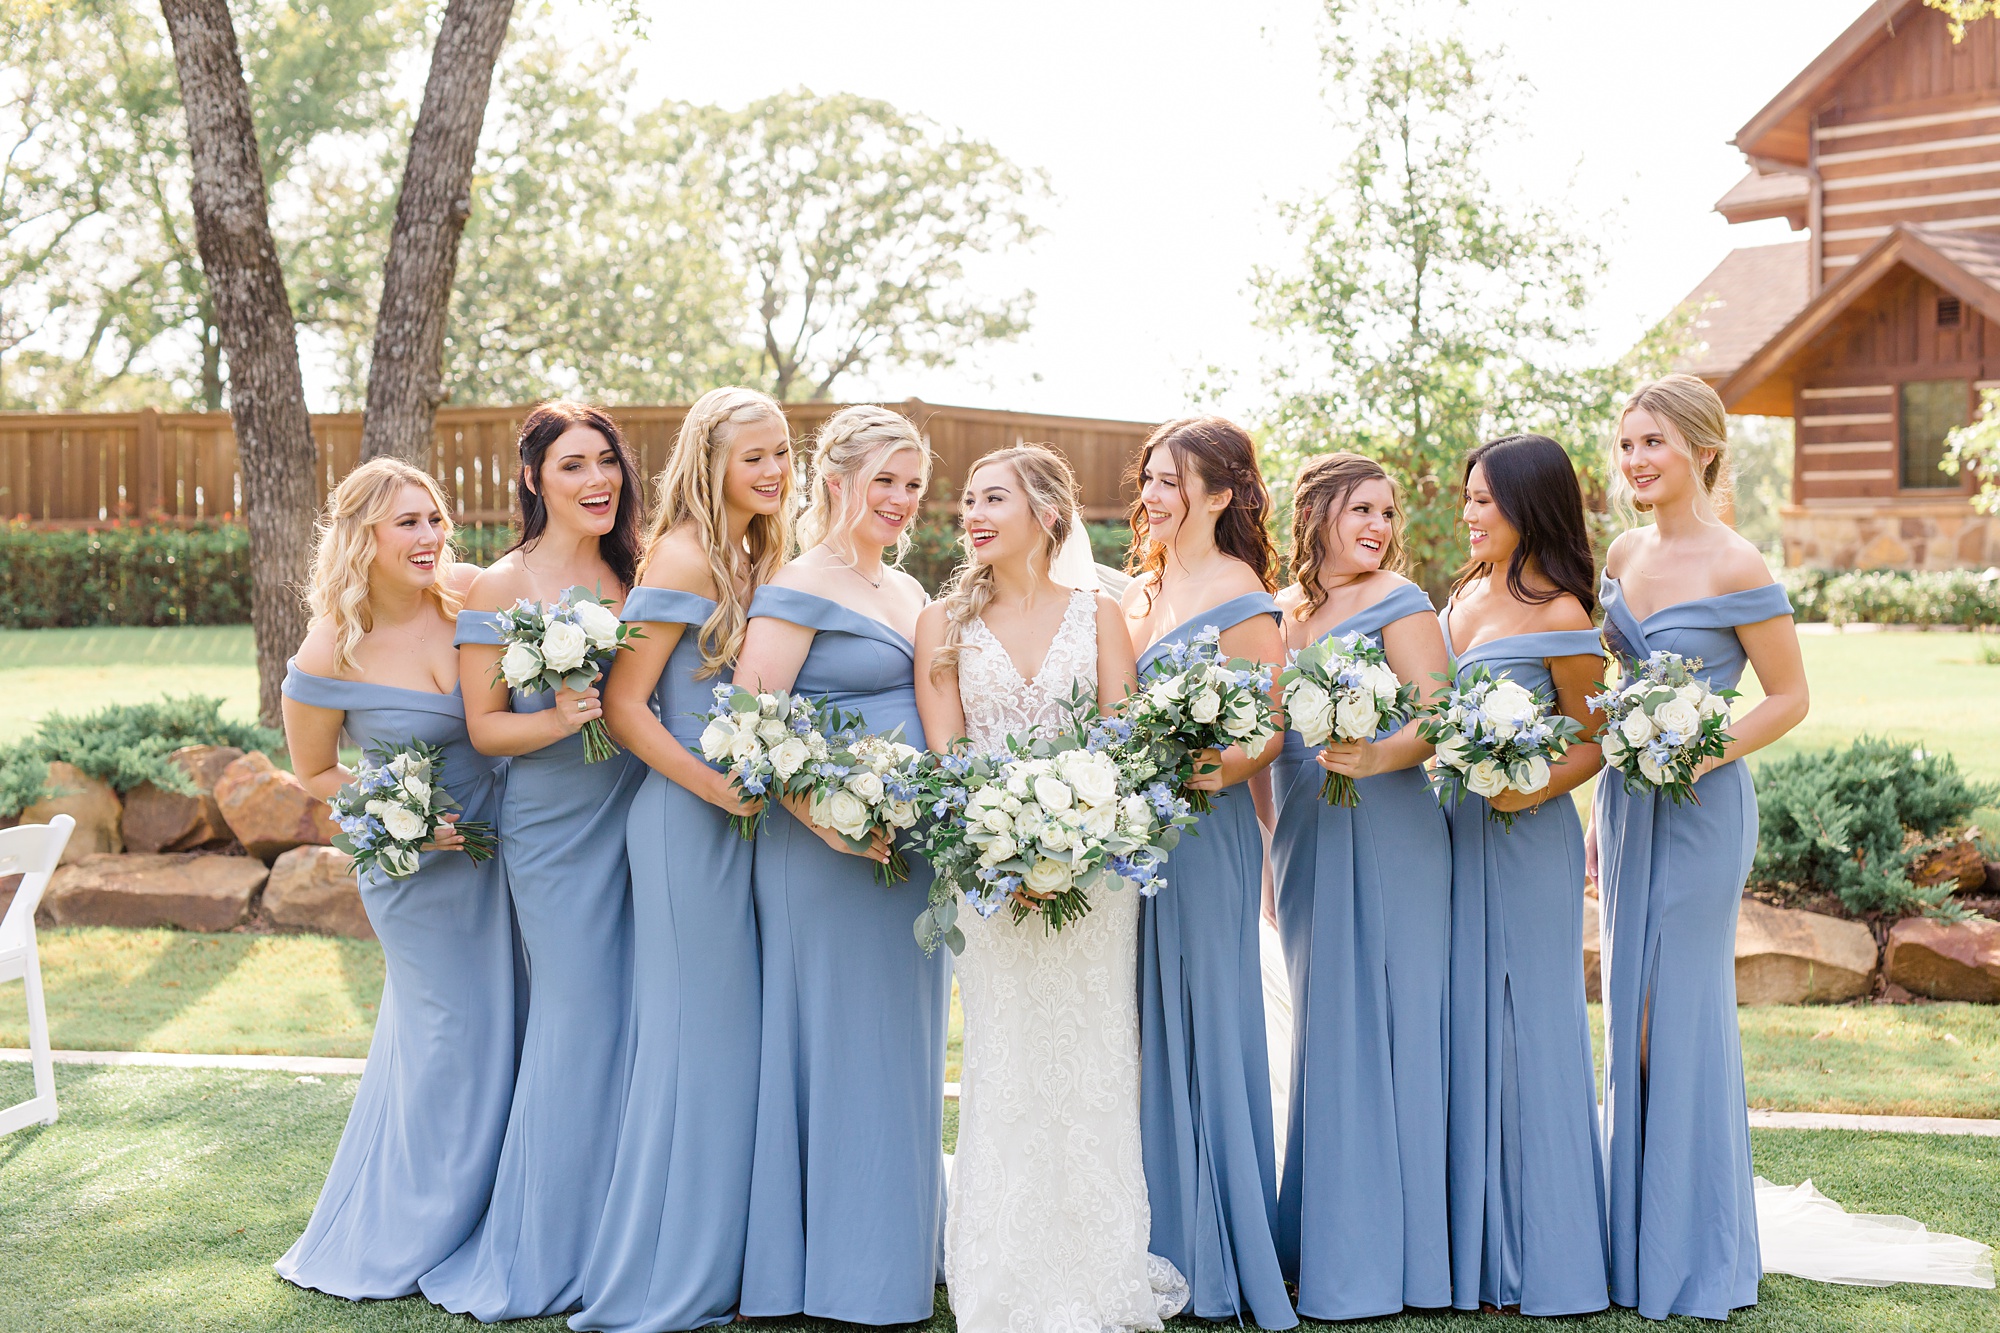 bridesmaids in blue gowns hold bouquets with white flowers